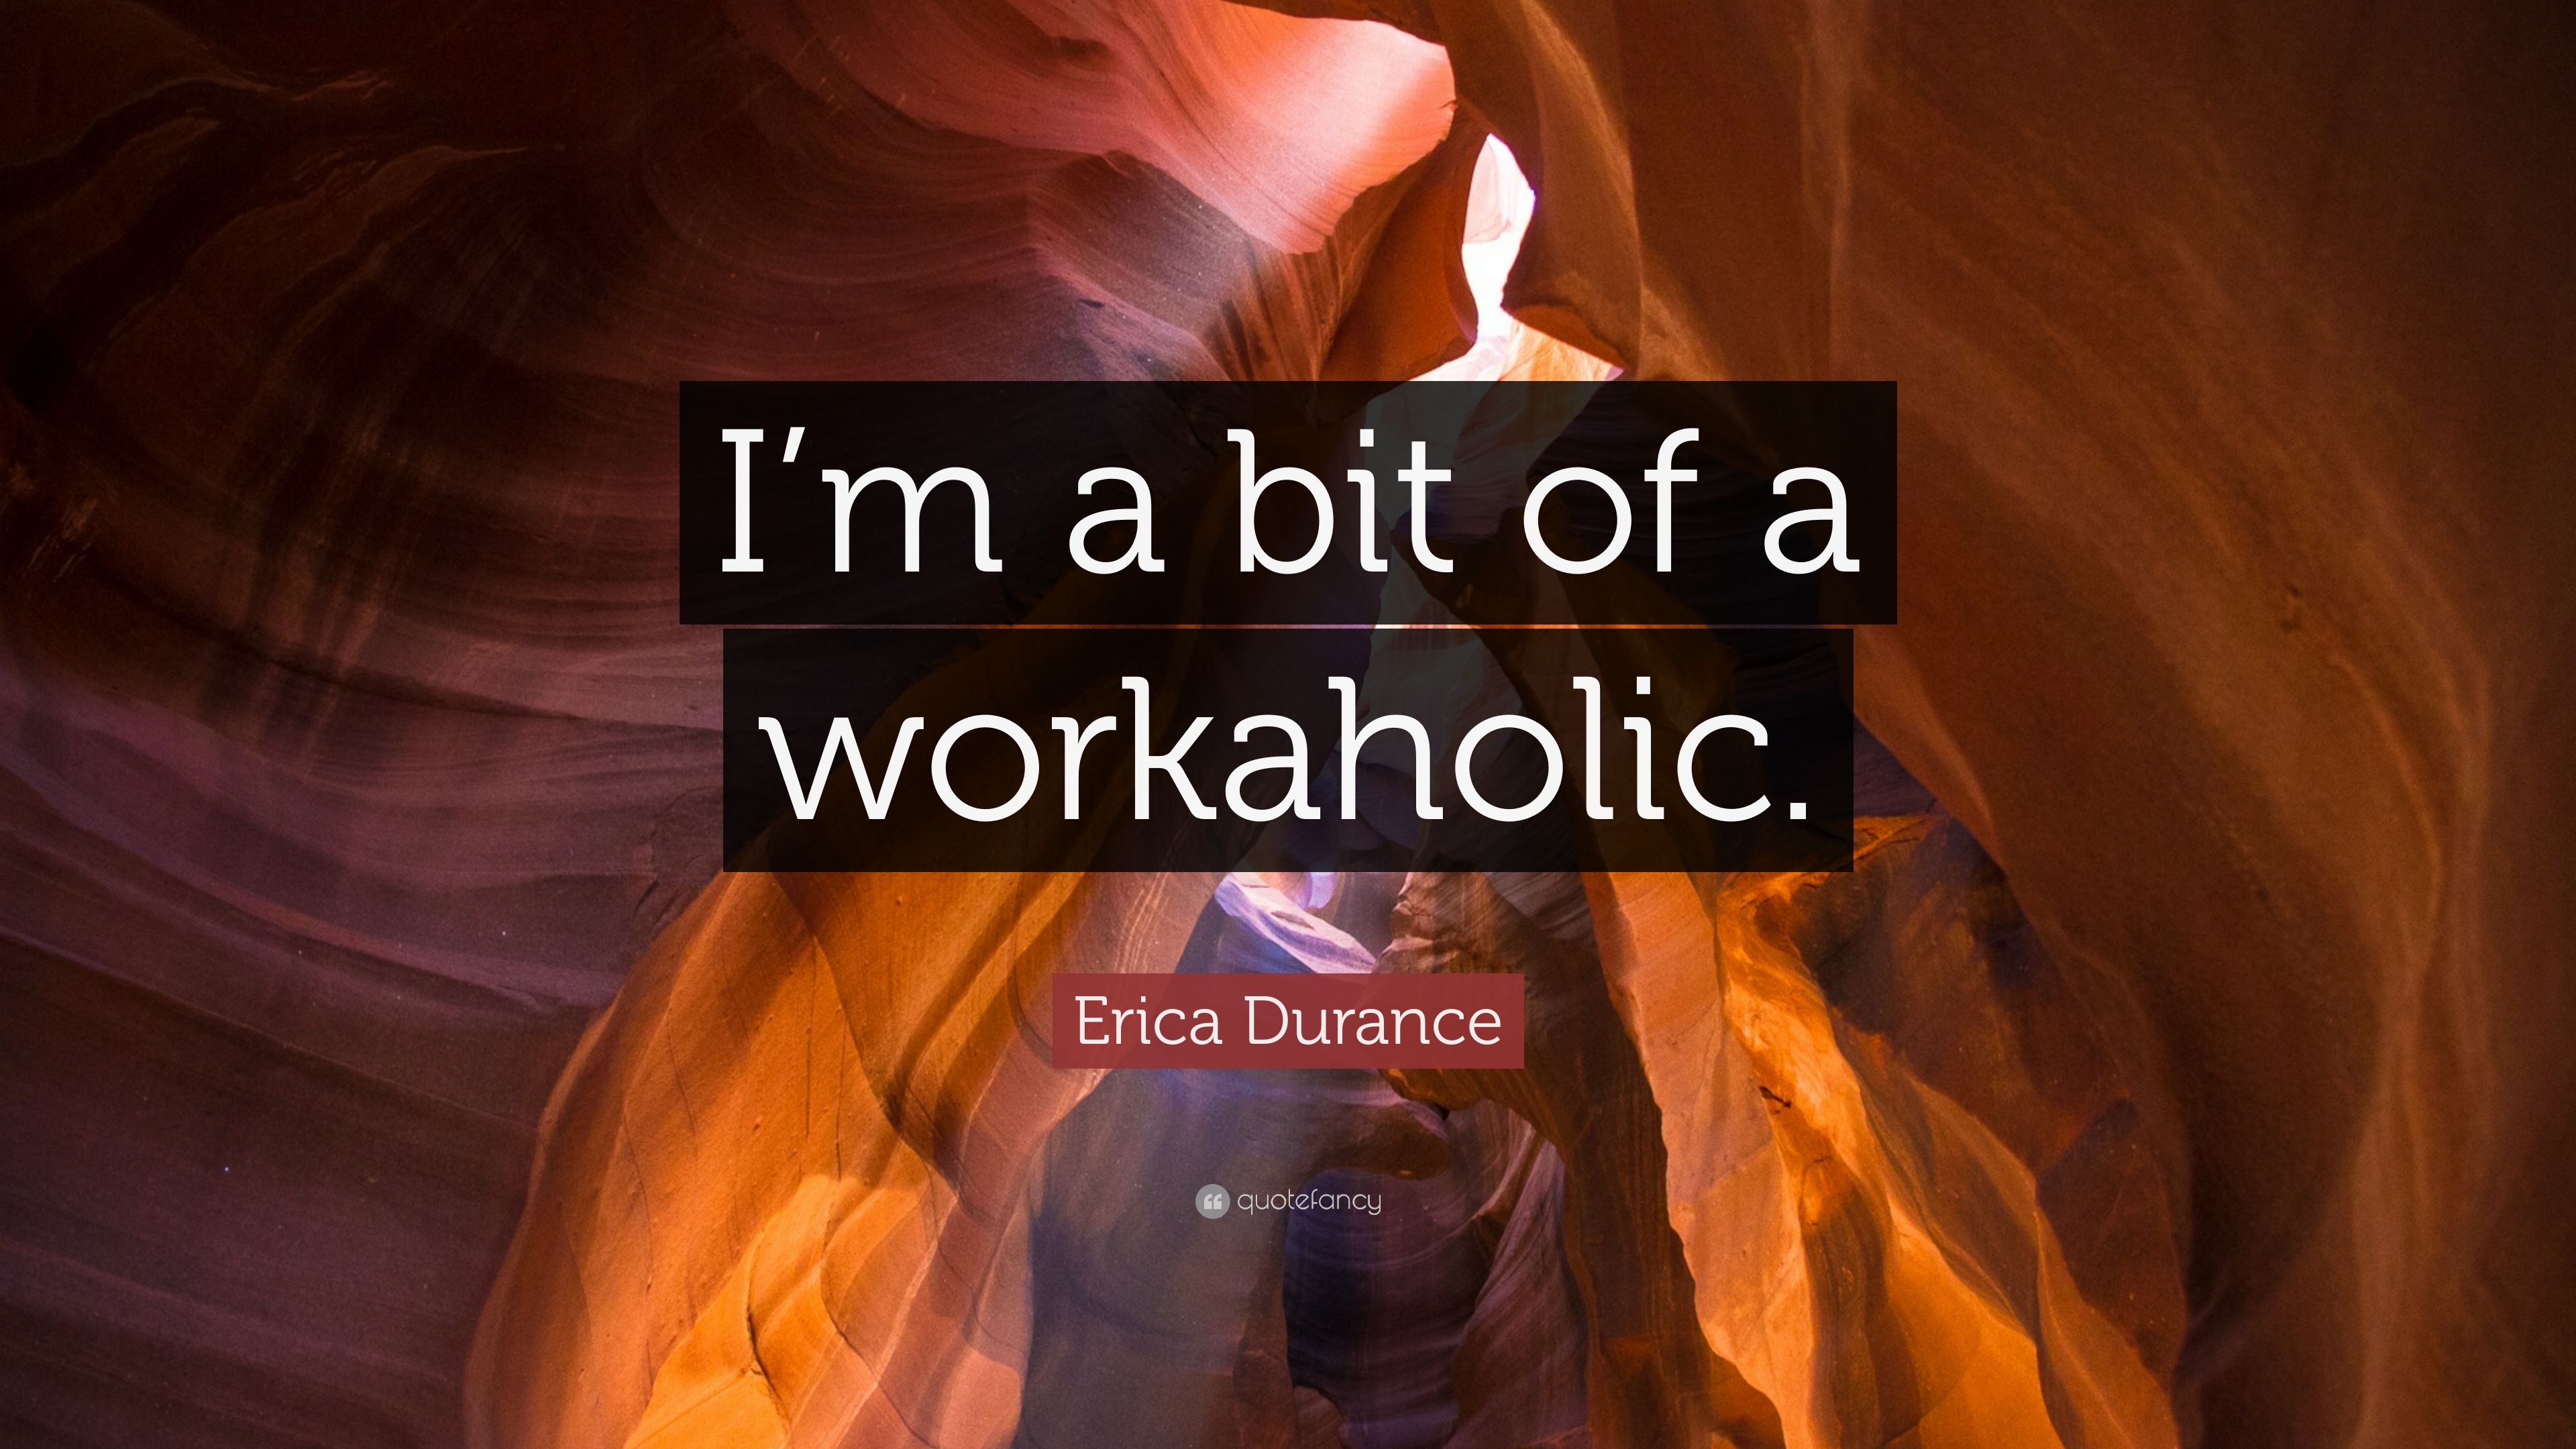 Erica Durance Quote: “I'm a bit of a workaholic.”